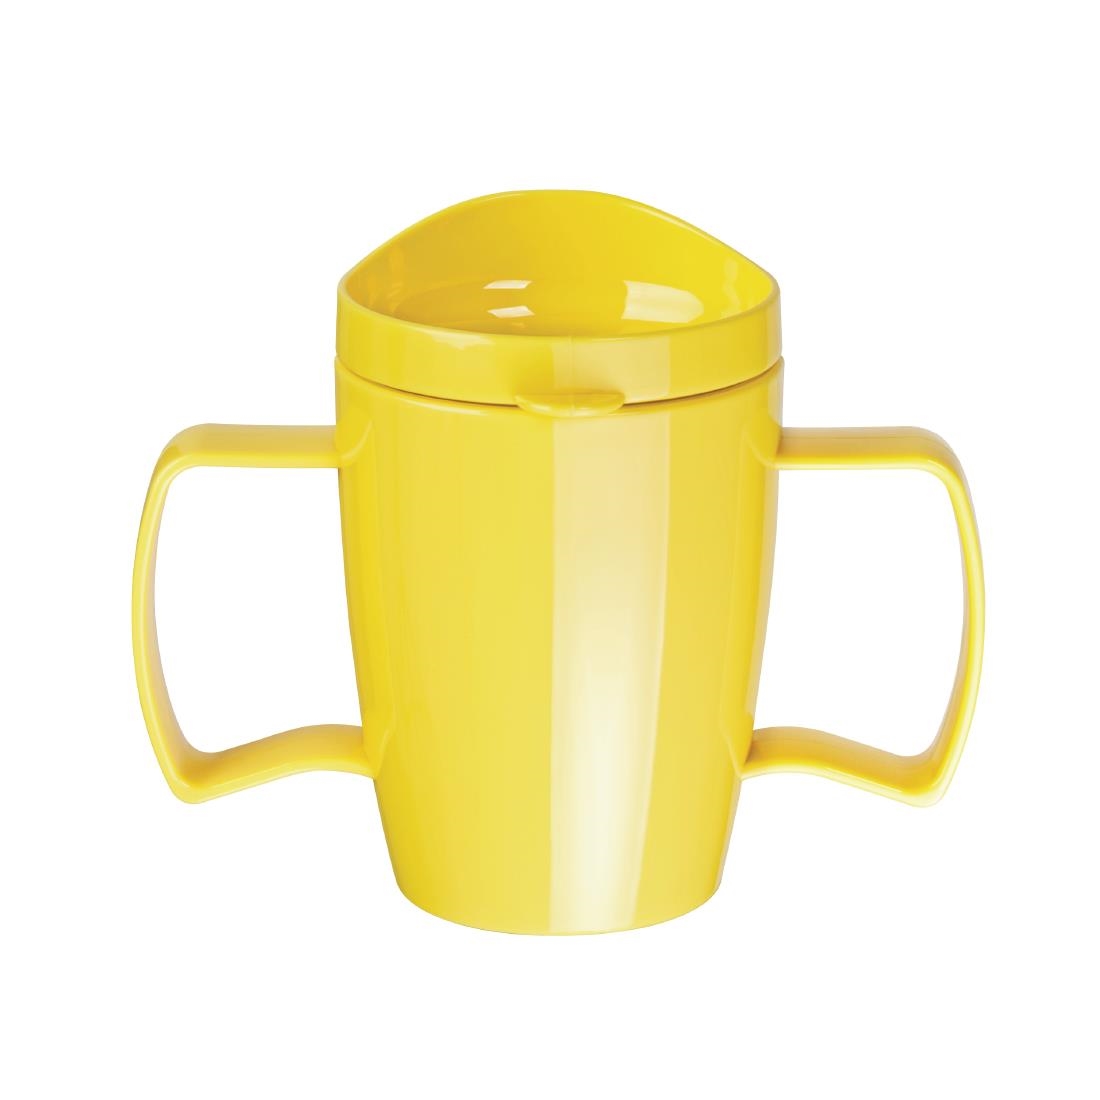 Olympia Kristallon Heritage Double-Handled Mugs with Lids Yellow 300ml (Pack of 4)